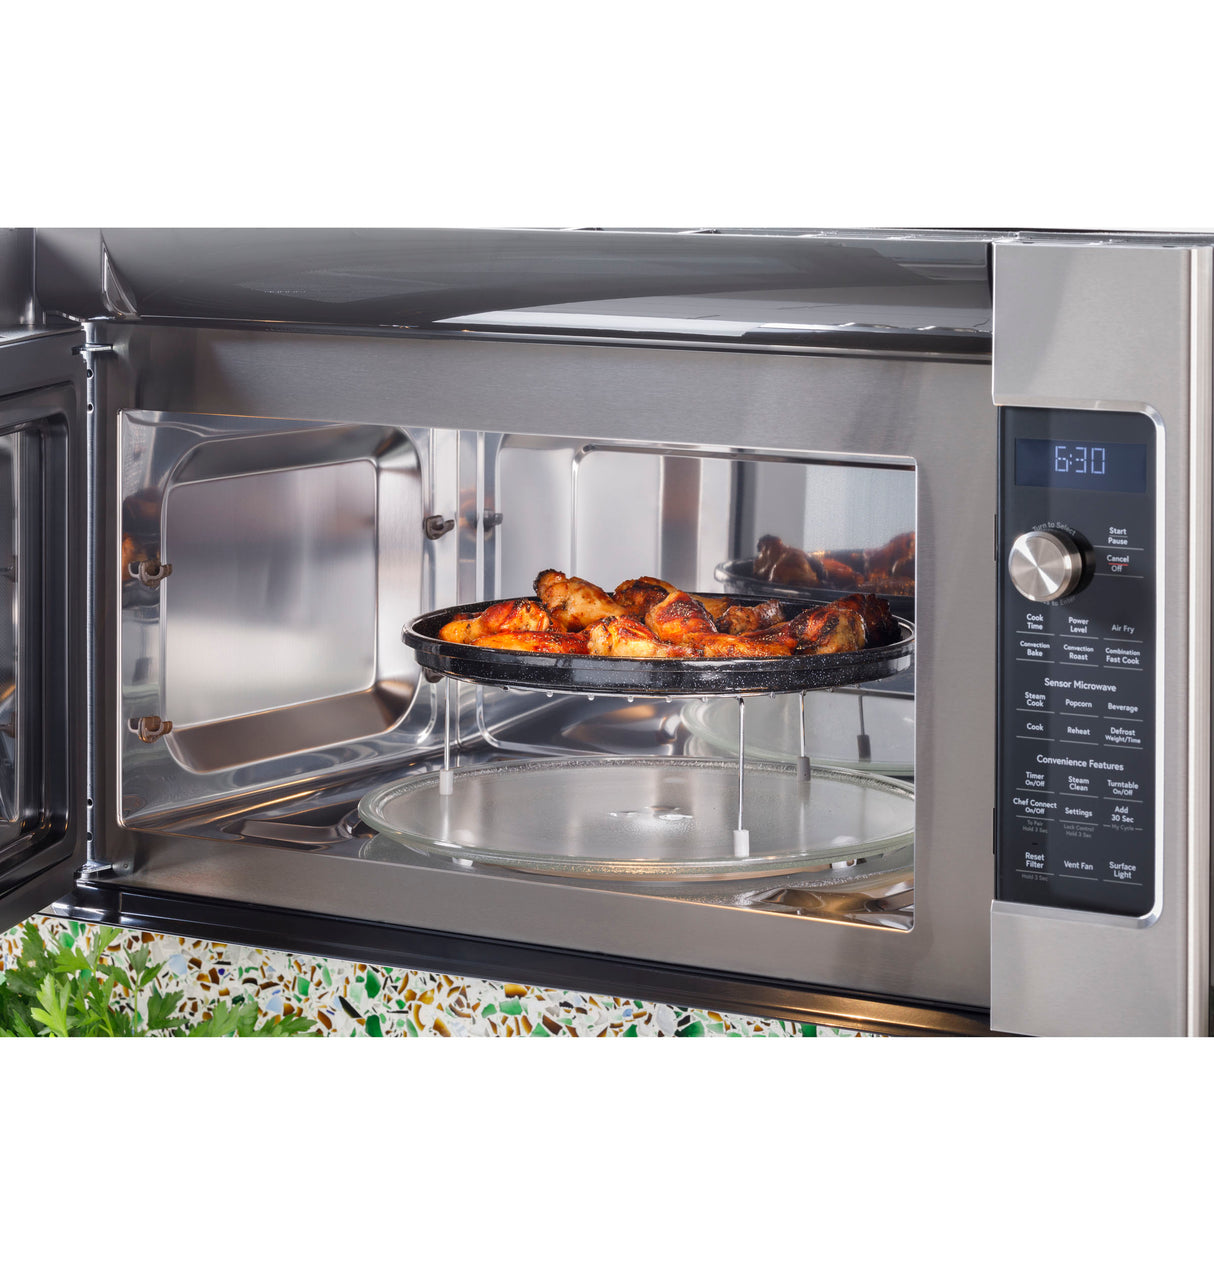 Caf(eback)(TM) 1.7 Cu. Ft. Convection Over-the-Range Microwave Oven - (CVM517P4RW2)